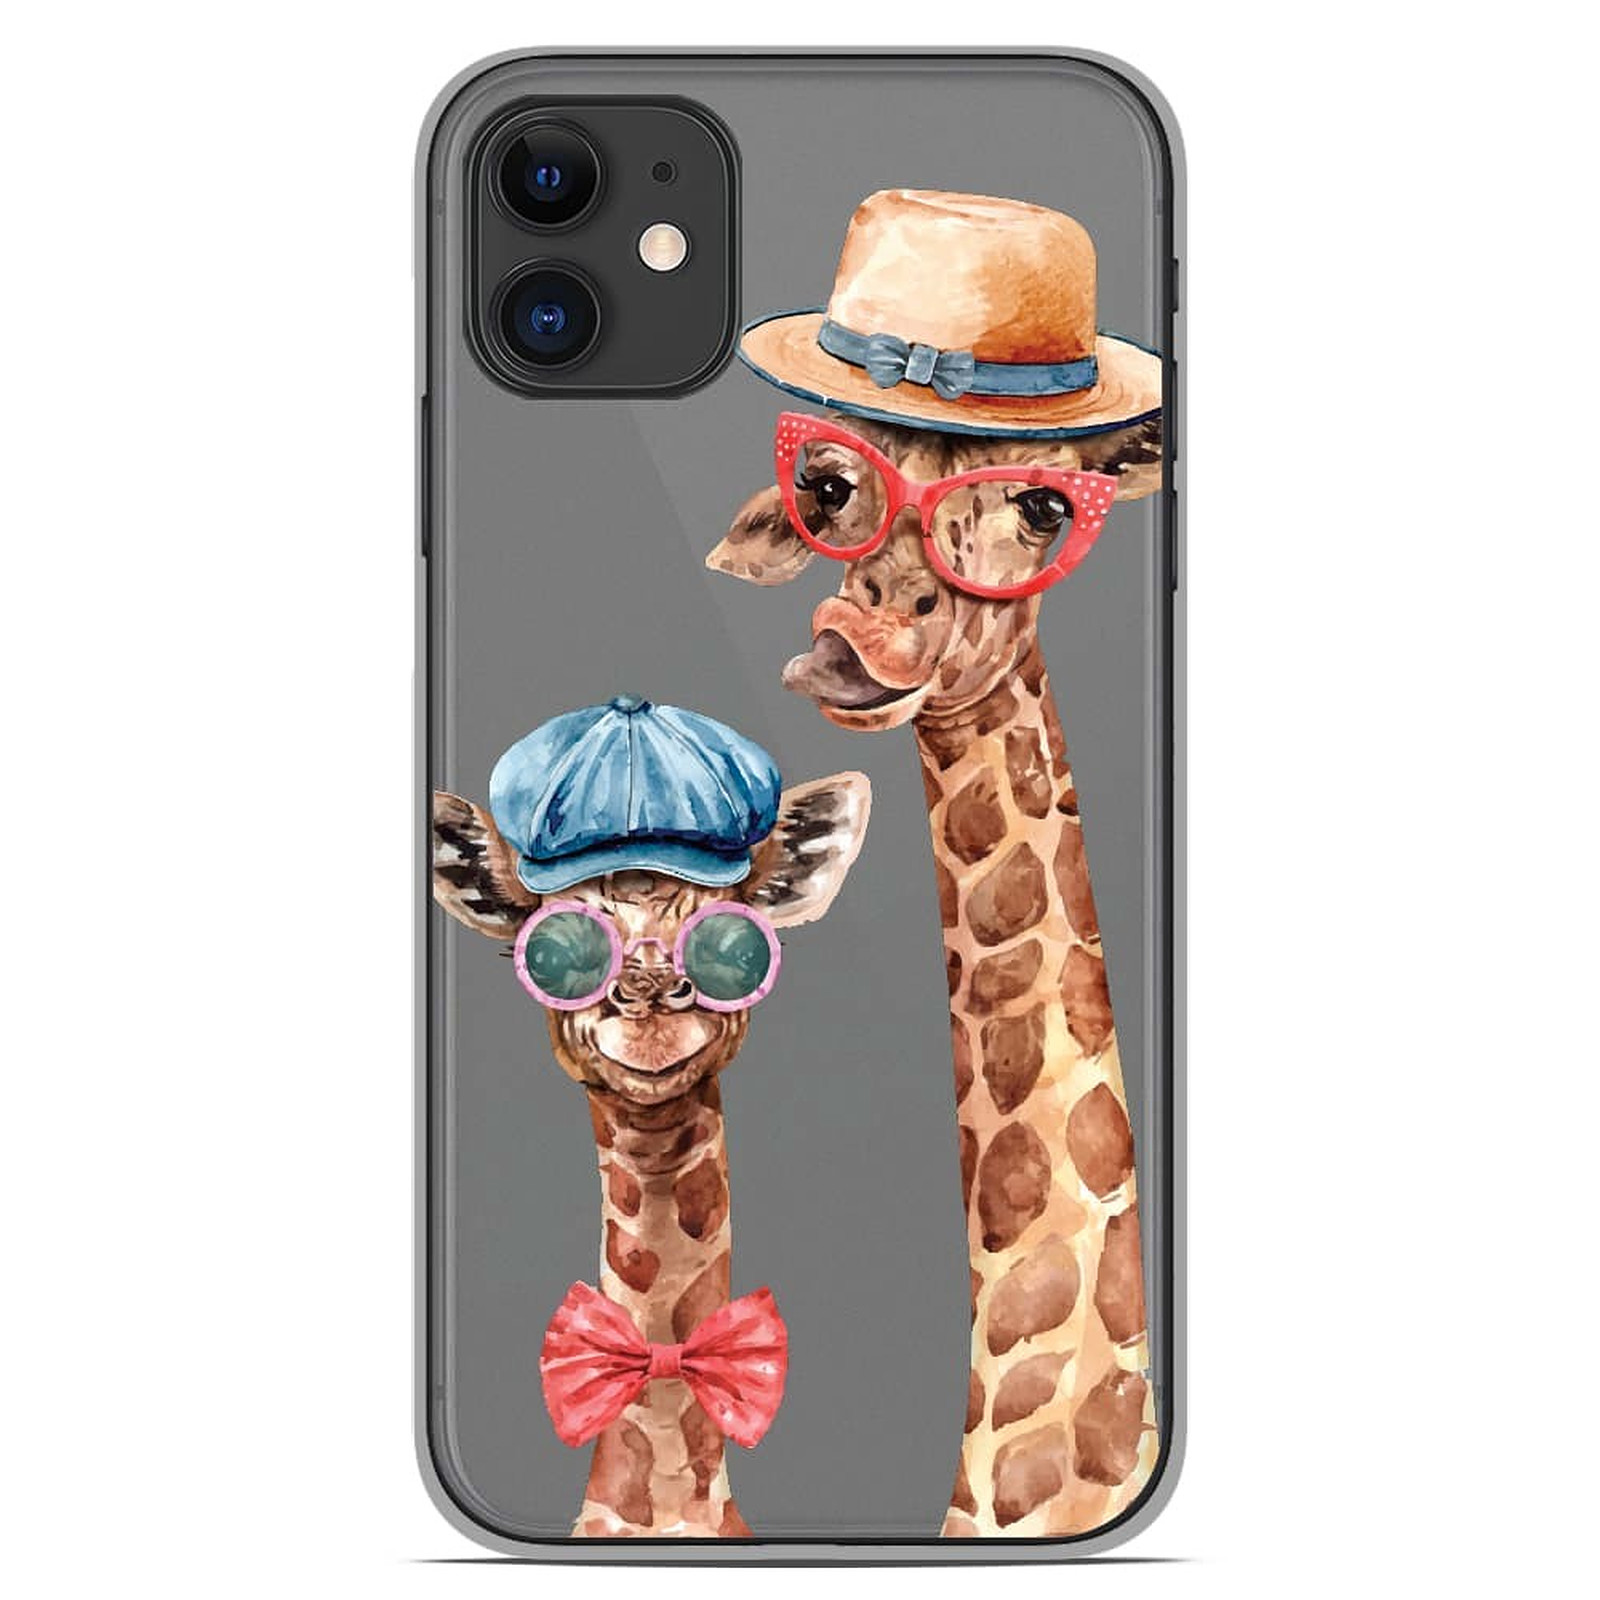 1001 Coques Coque silicone gel Apple iPhone 11 motif Funny Girafe - Coque telephone 1001Coques